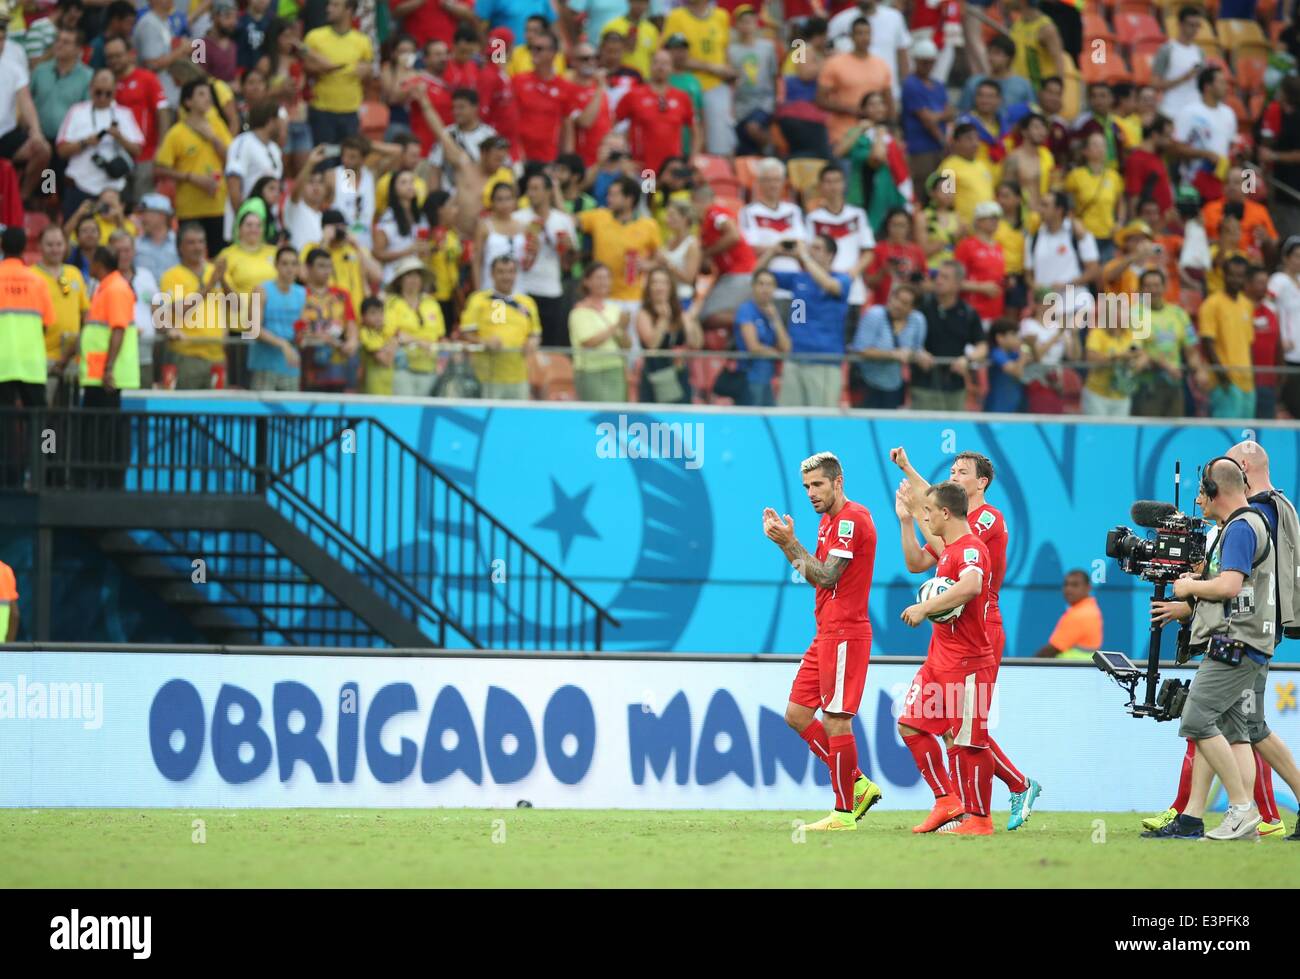 (140625) -- MANAUS, June 25, 2014 (Xinhua) -- Switzerland's players leave the field after a Group E match between Honduras and Switzerland of 2014 FIFA World Cup at the Arena Amazonia Stadium in Manaus, Brazil, on June 25, 2014. Switzerland won 3-0 over Honduras on Wednesday. (Xinhua/Li Ming)(pcy) Stock Photo